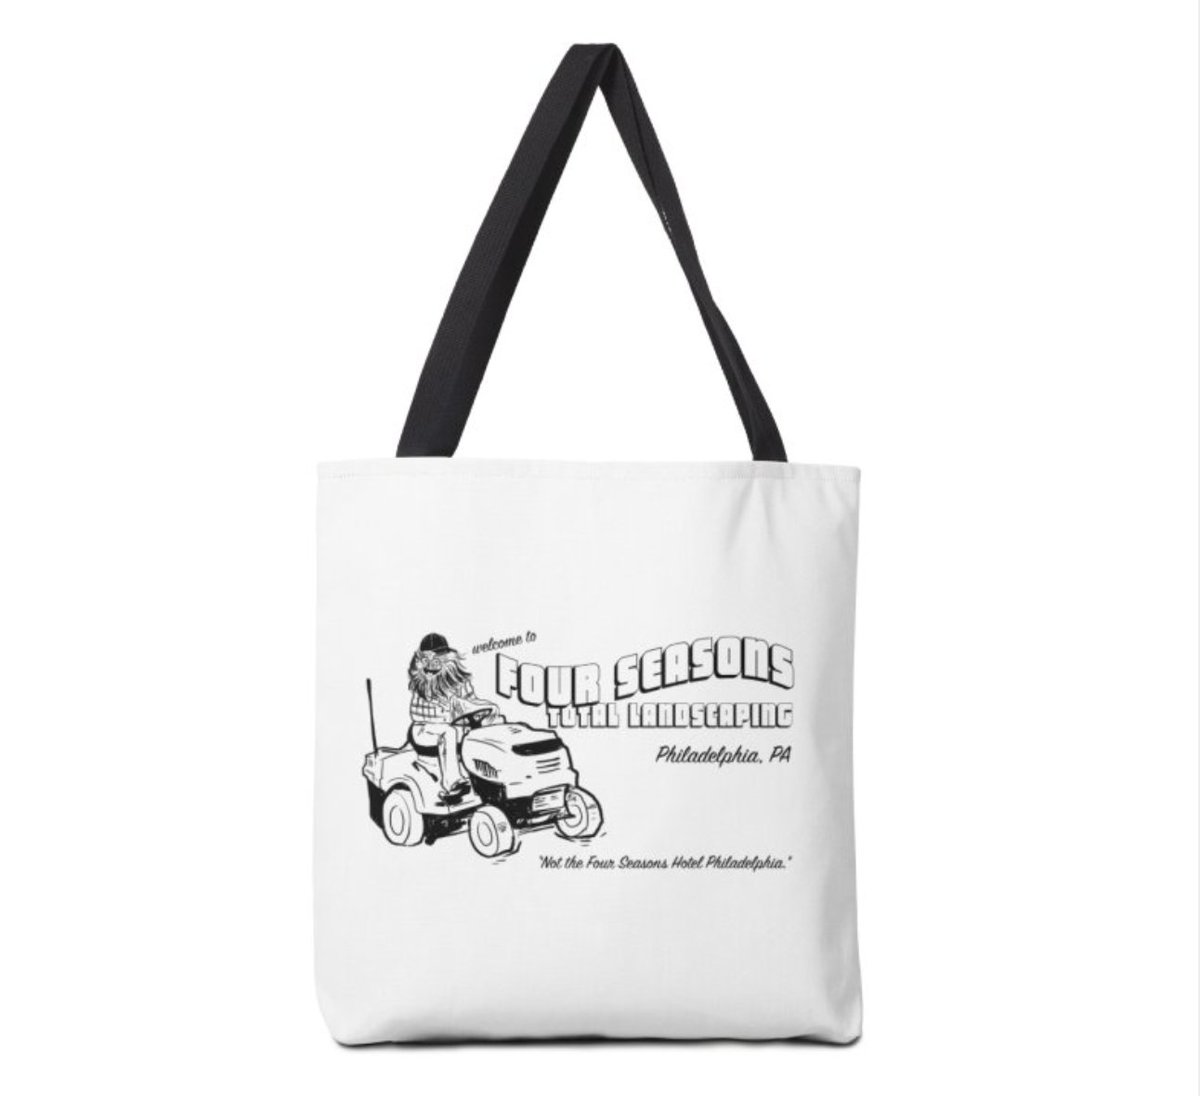 I left tote bags up(because I can't have an empty listing to simply inform people of this), and 100% of those proceeds are going to the National Queer and Trans Therapists of Color Network(Threadless does not list any voting rights non-profits).  https://shopclass.threadless.com/designs/four-seasons-total-landscaping